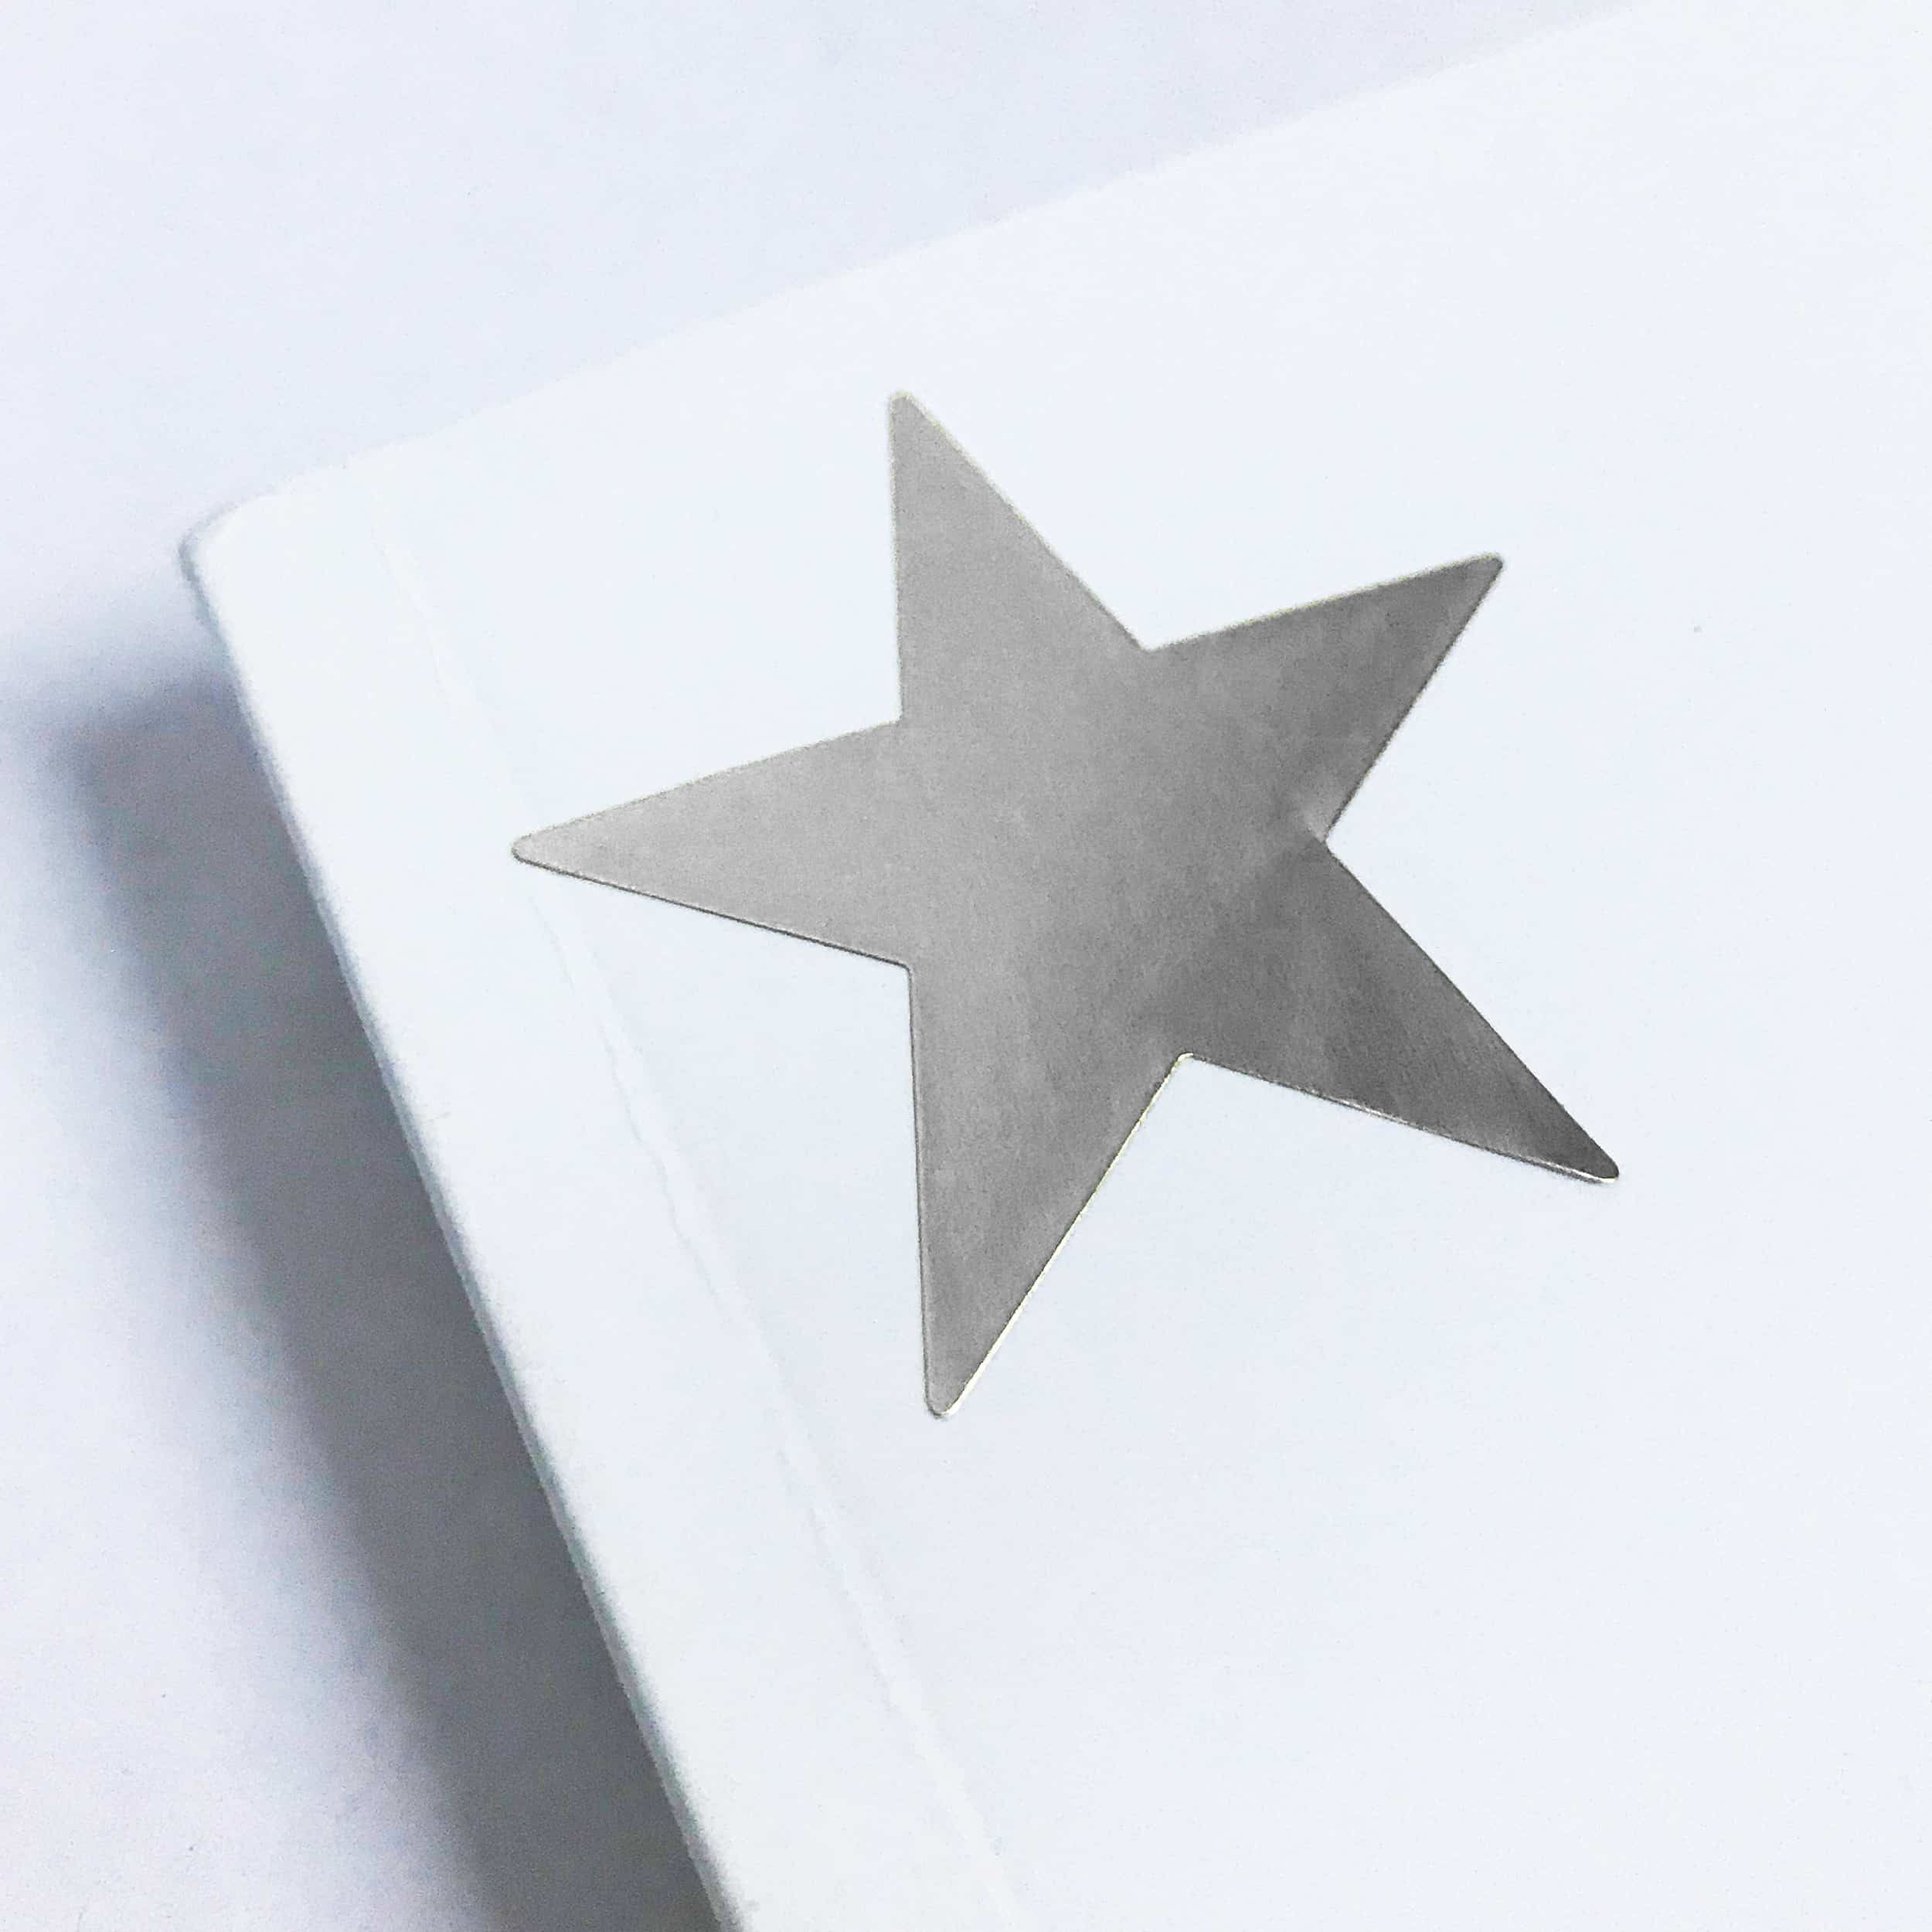 Silver Star Stickers